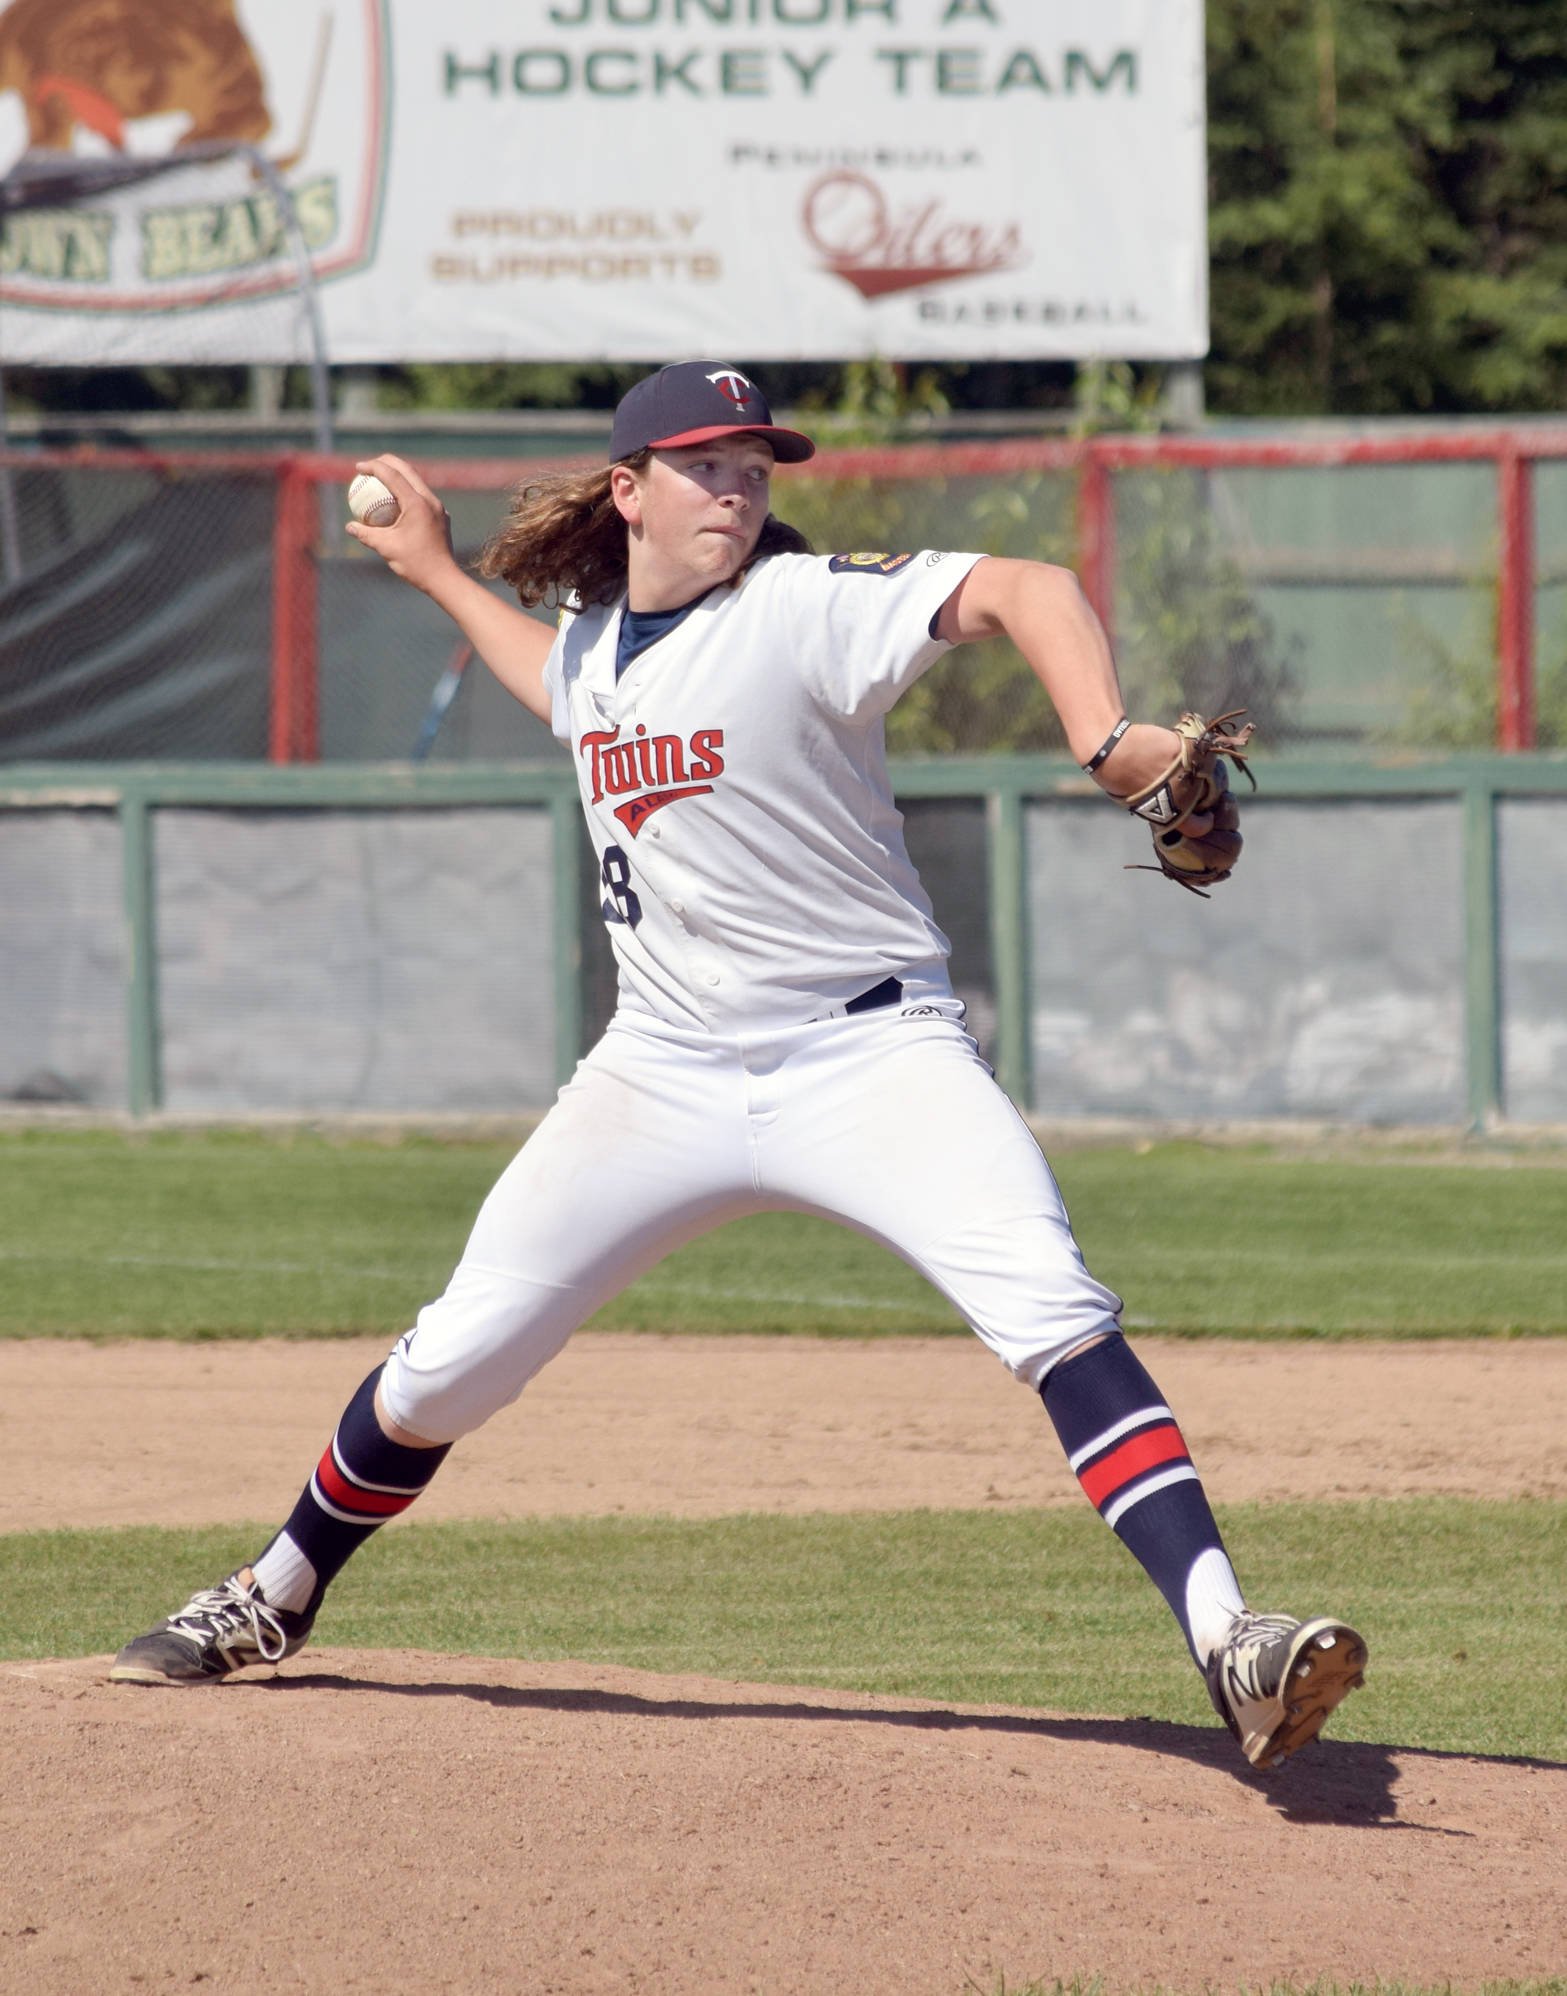 Twins starter Logan Smith delivers to East on Thursday at Coral Seymour Memorial Park in Kenai. (Photo by Jeff Helminiak/Peninsula Clarion)